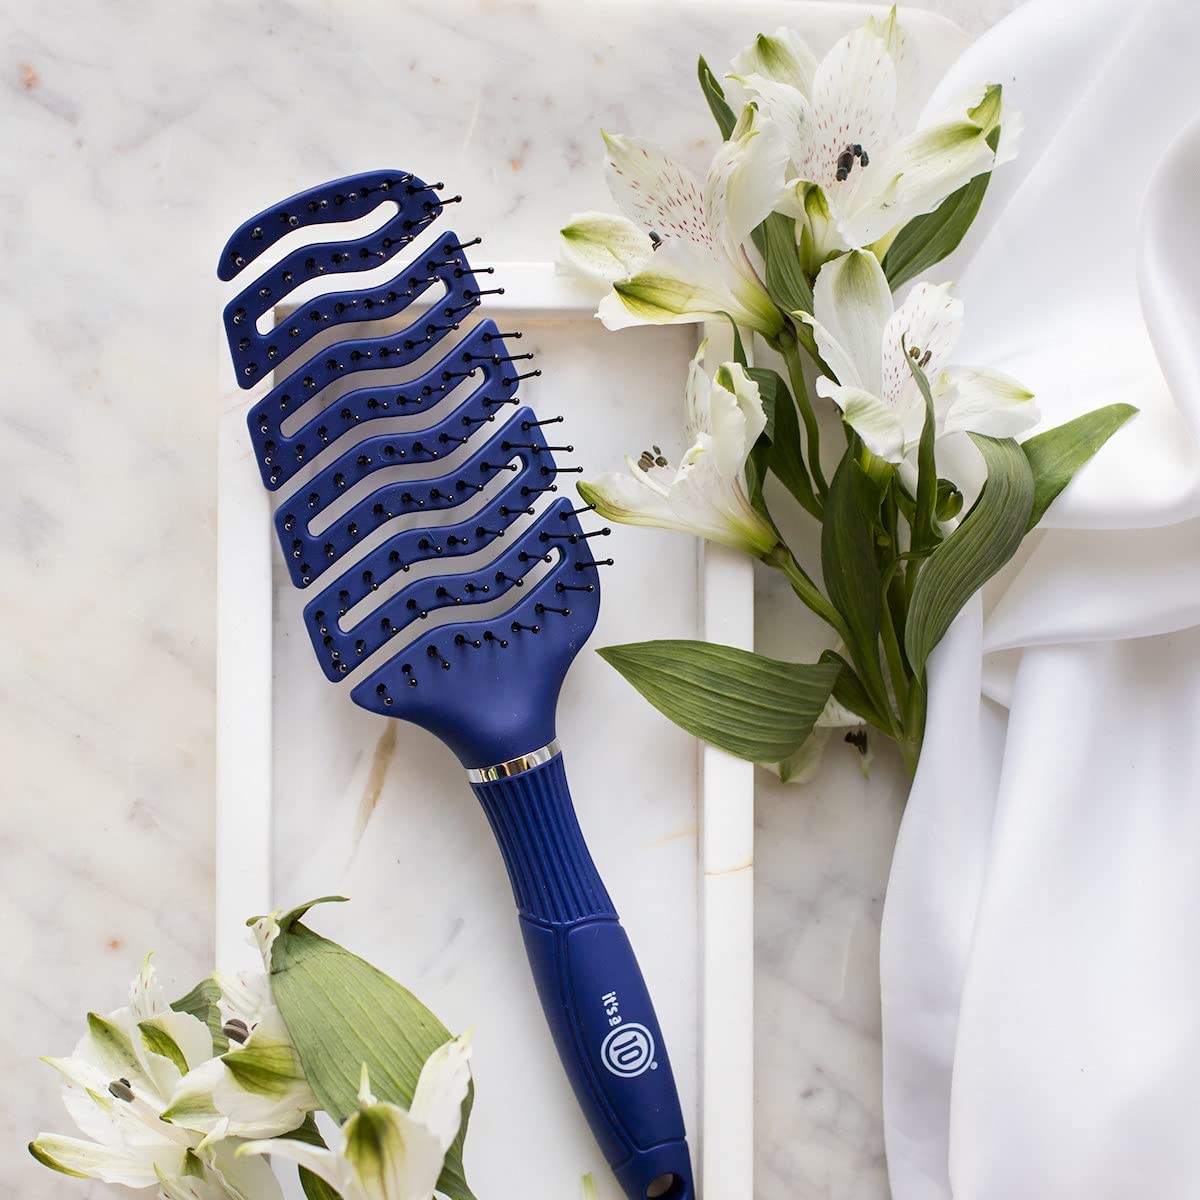 It's A 10 Miracle Detangling Brush